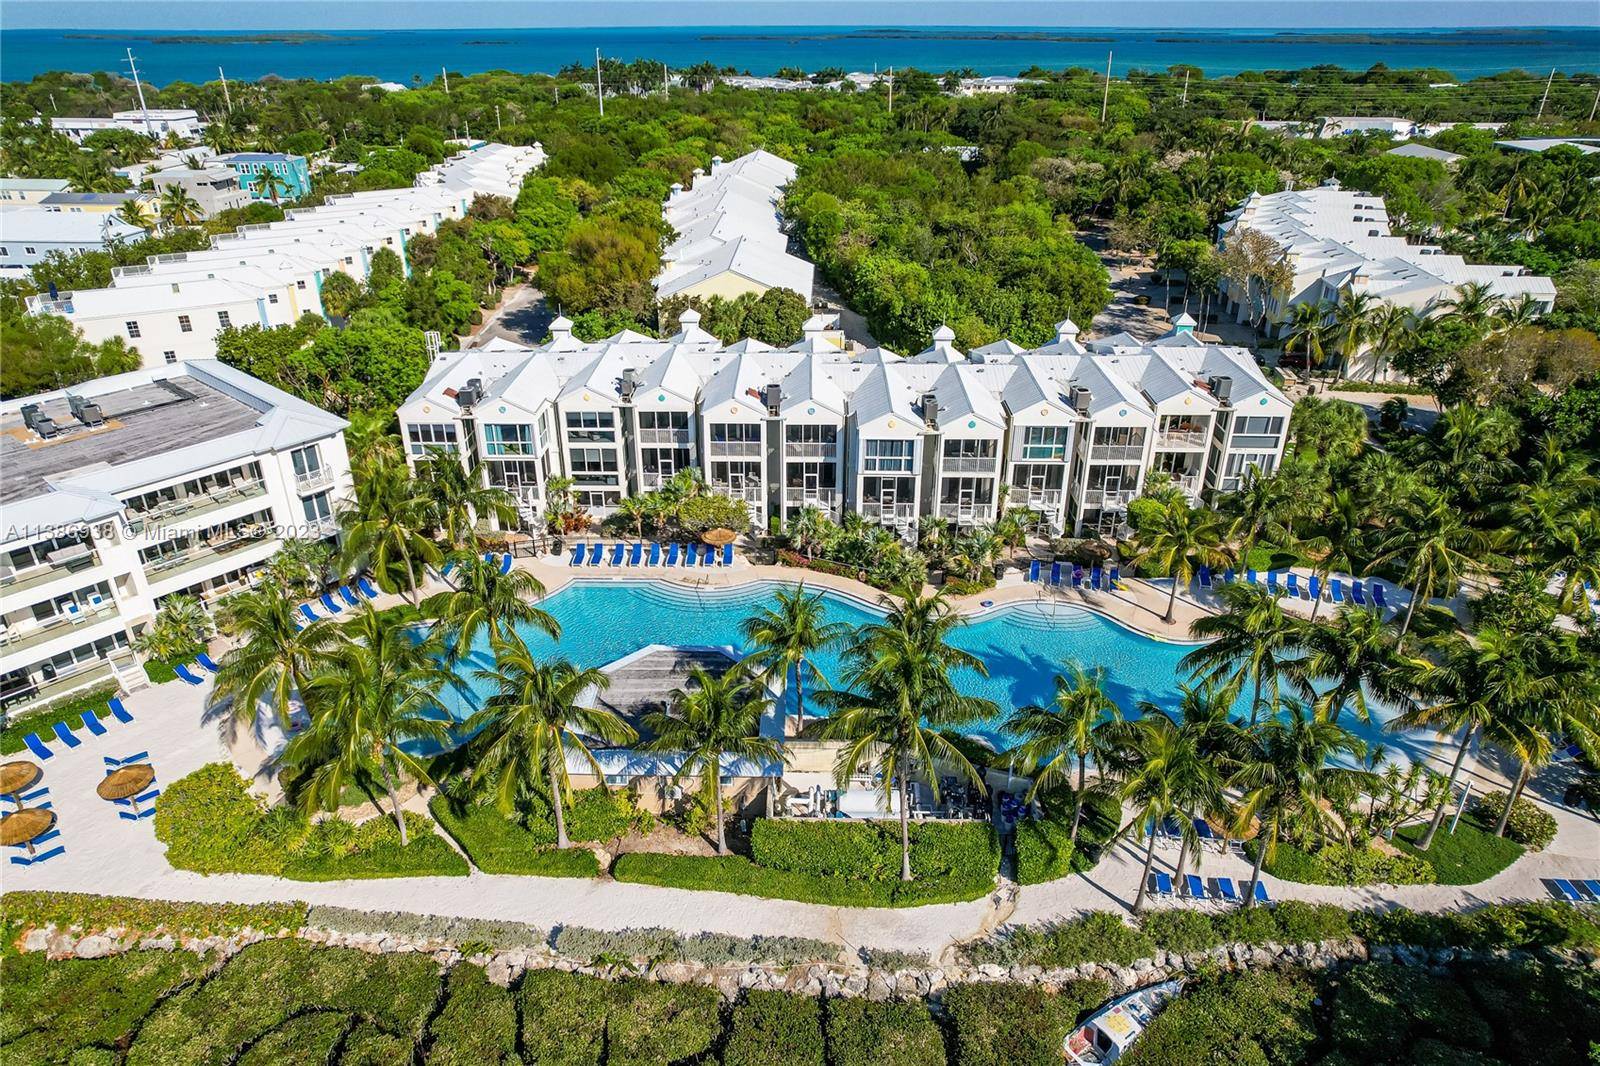 Discover Unit 607, the epitome of luxury resort style living at Mariner's Club Key Largo.